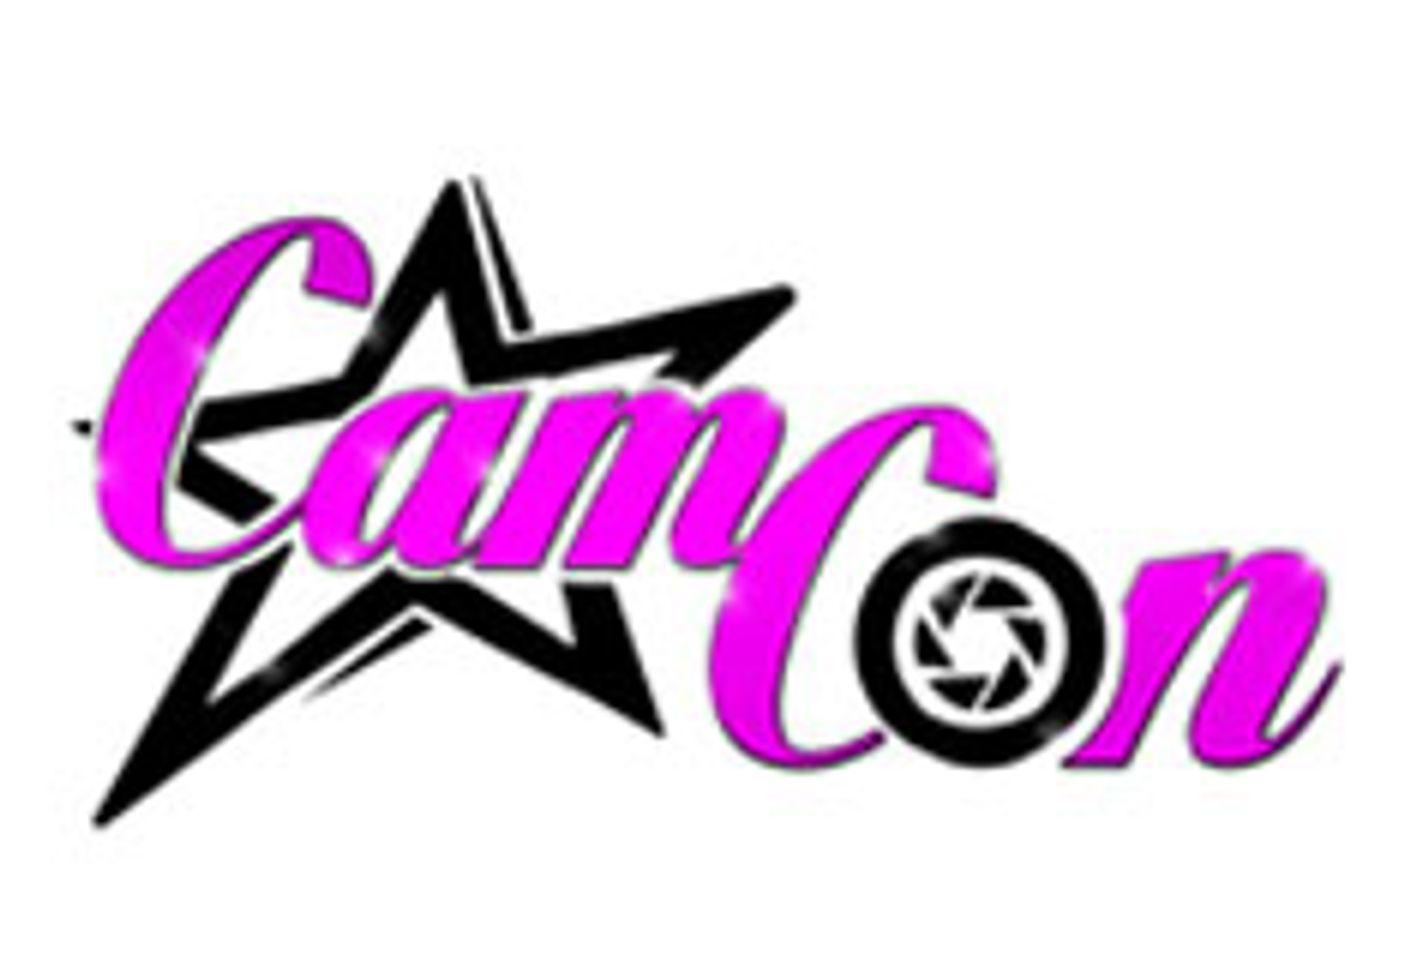 Camming Com 2014 Partners with Latin America's Camming Con